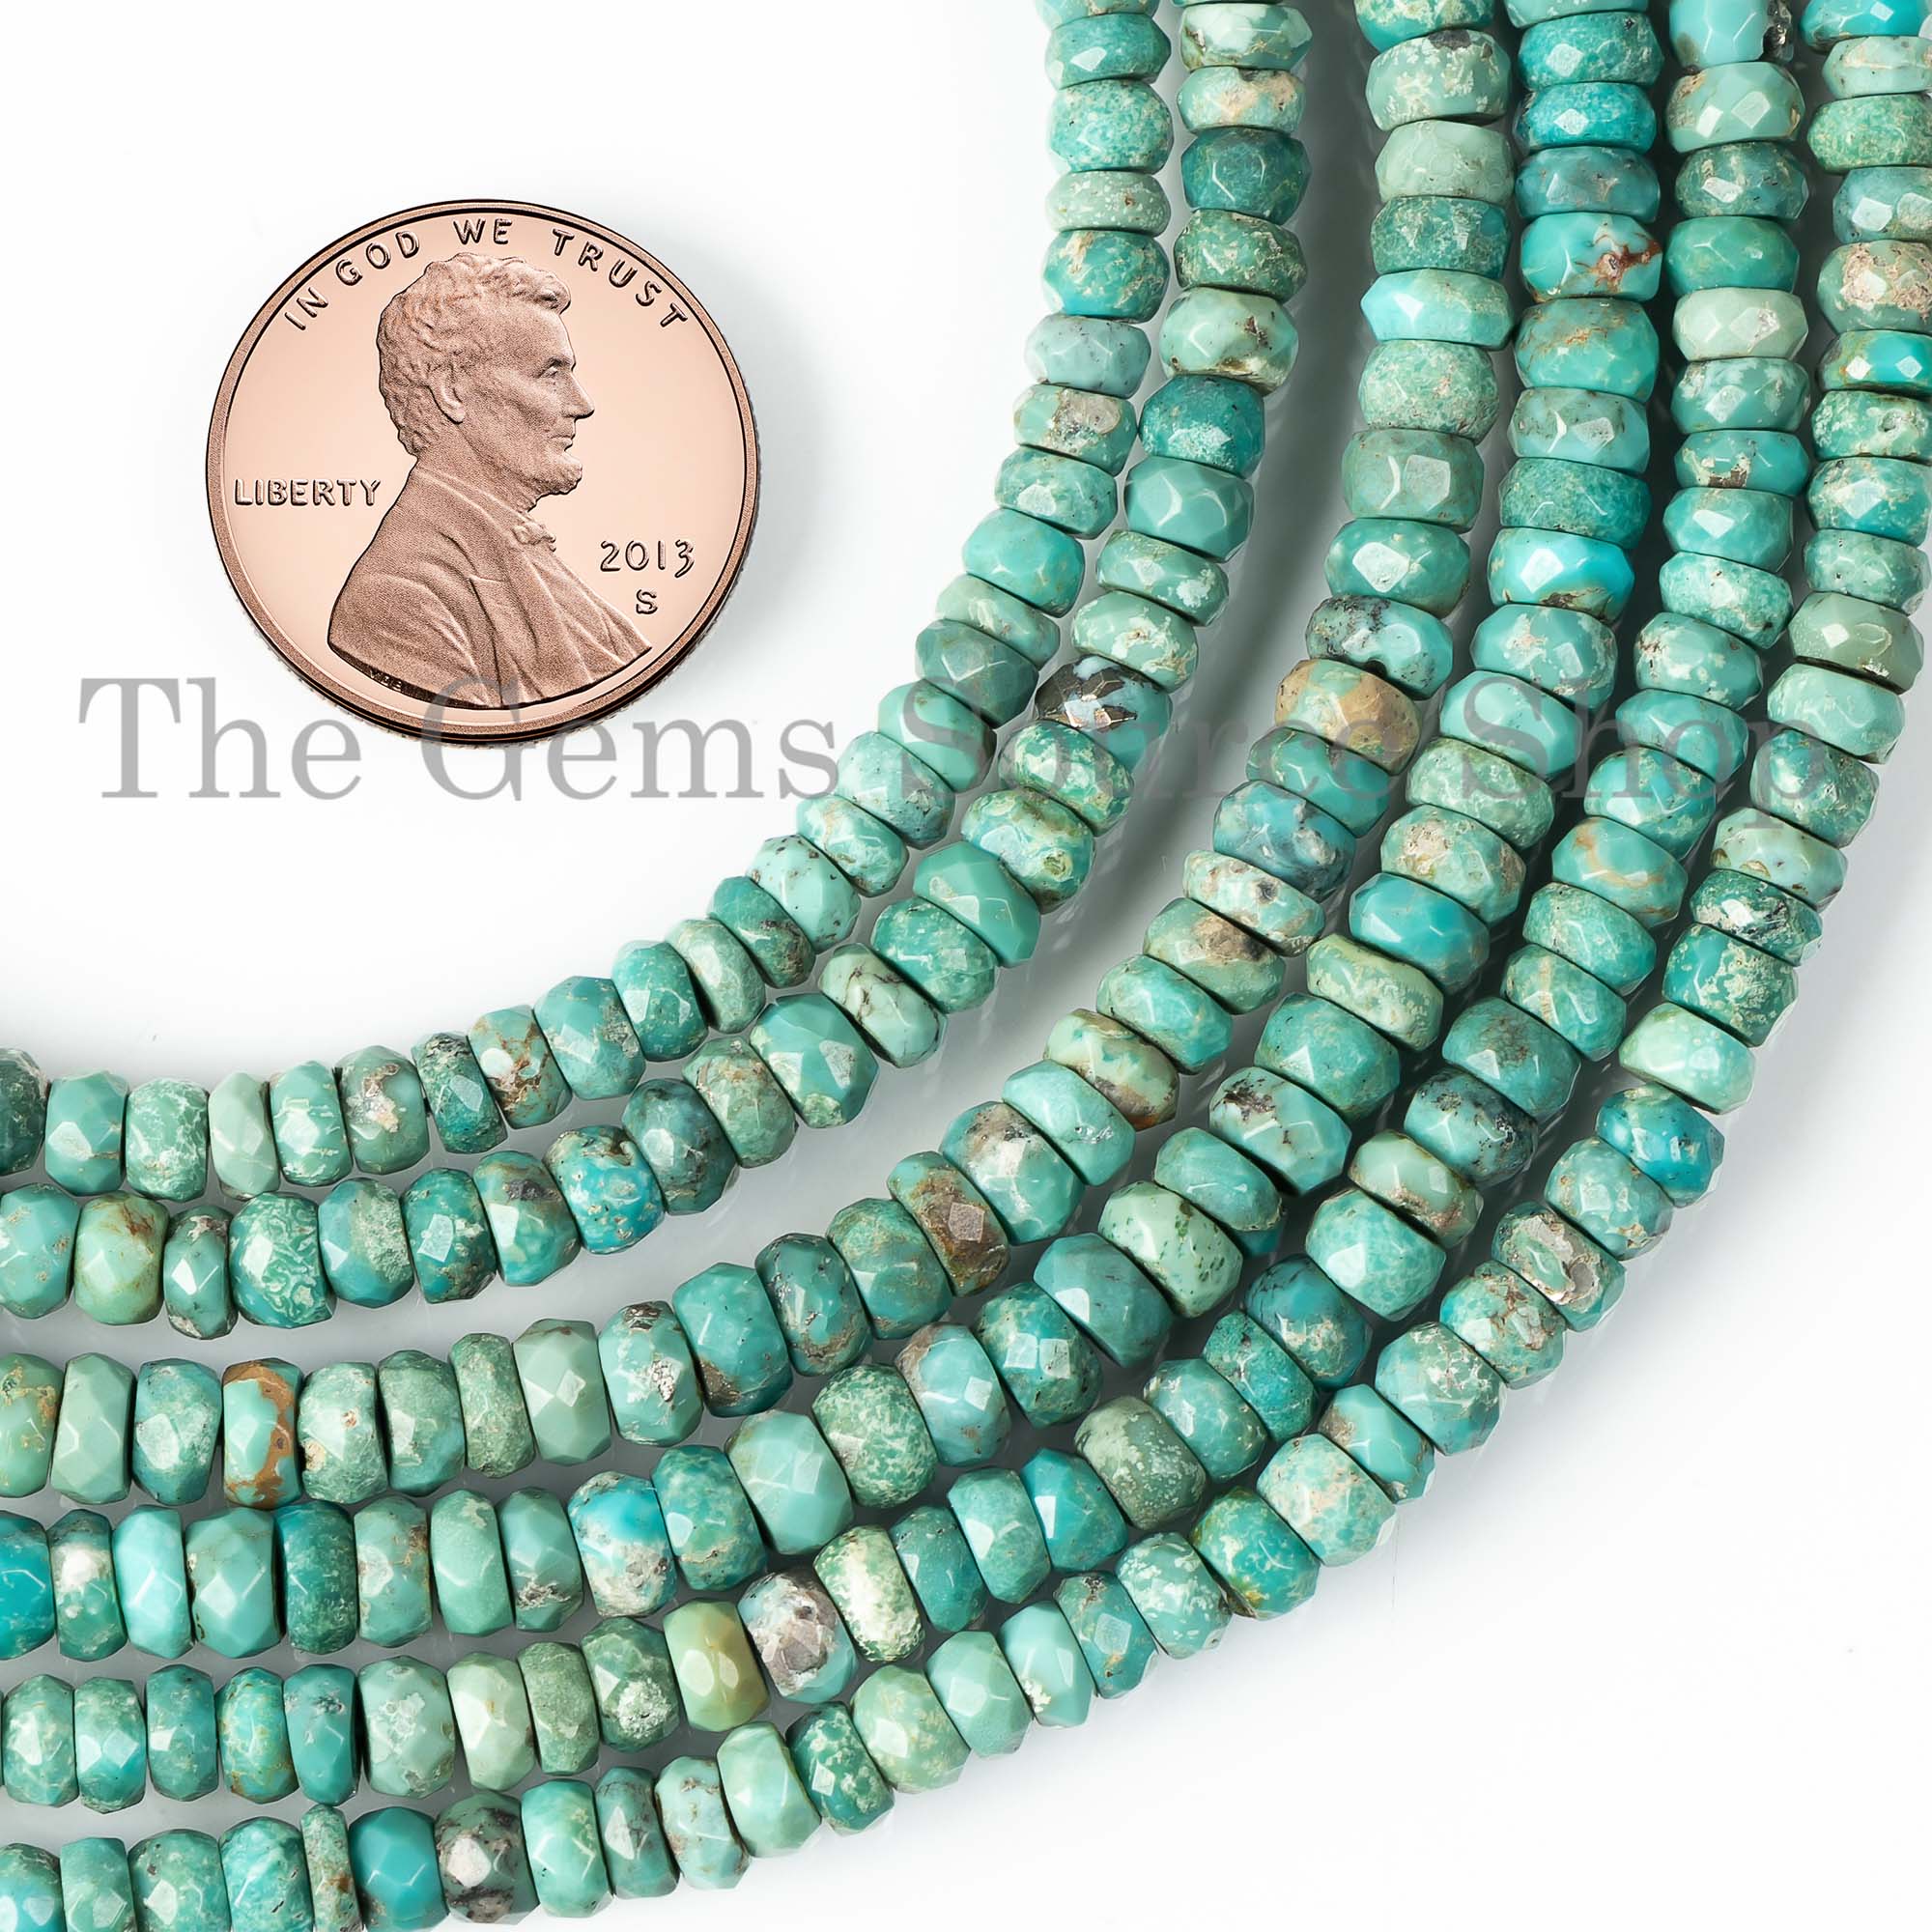 Natural Turquoise Faceted Rondelle Beads, 4.5-5.5mm Arizona Turquoise Faceted Rondelle, Turquoise Rondelle, Rondelle Beads, Wholesale Beads